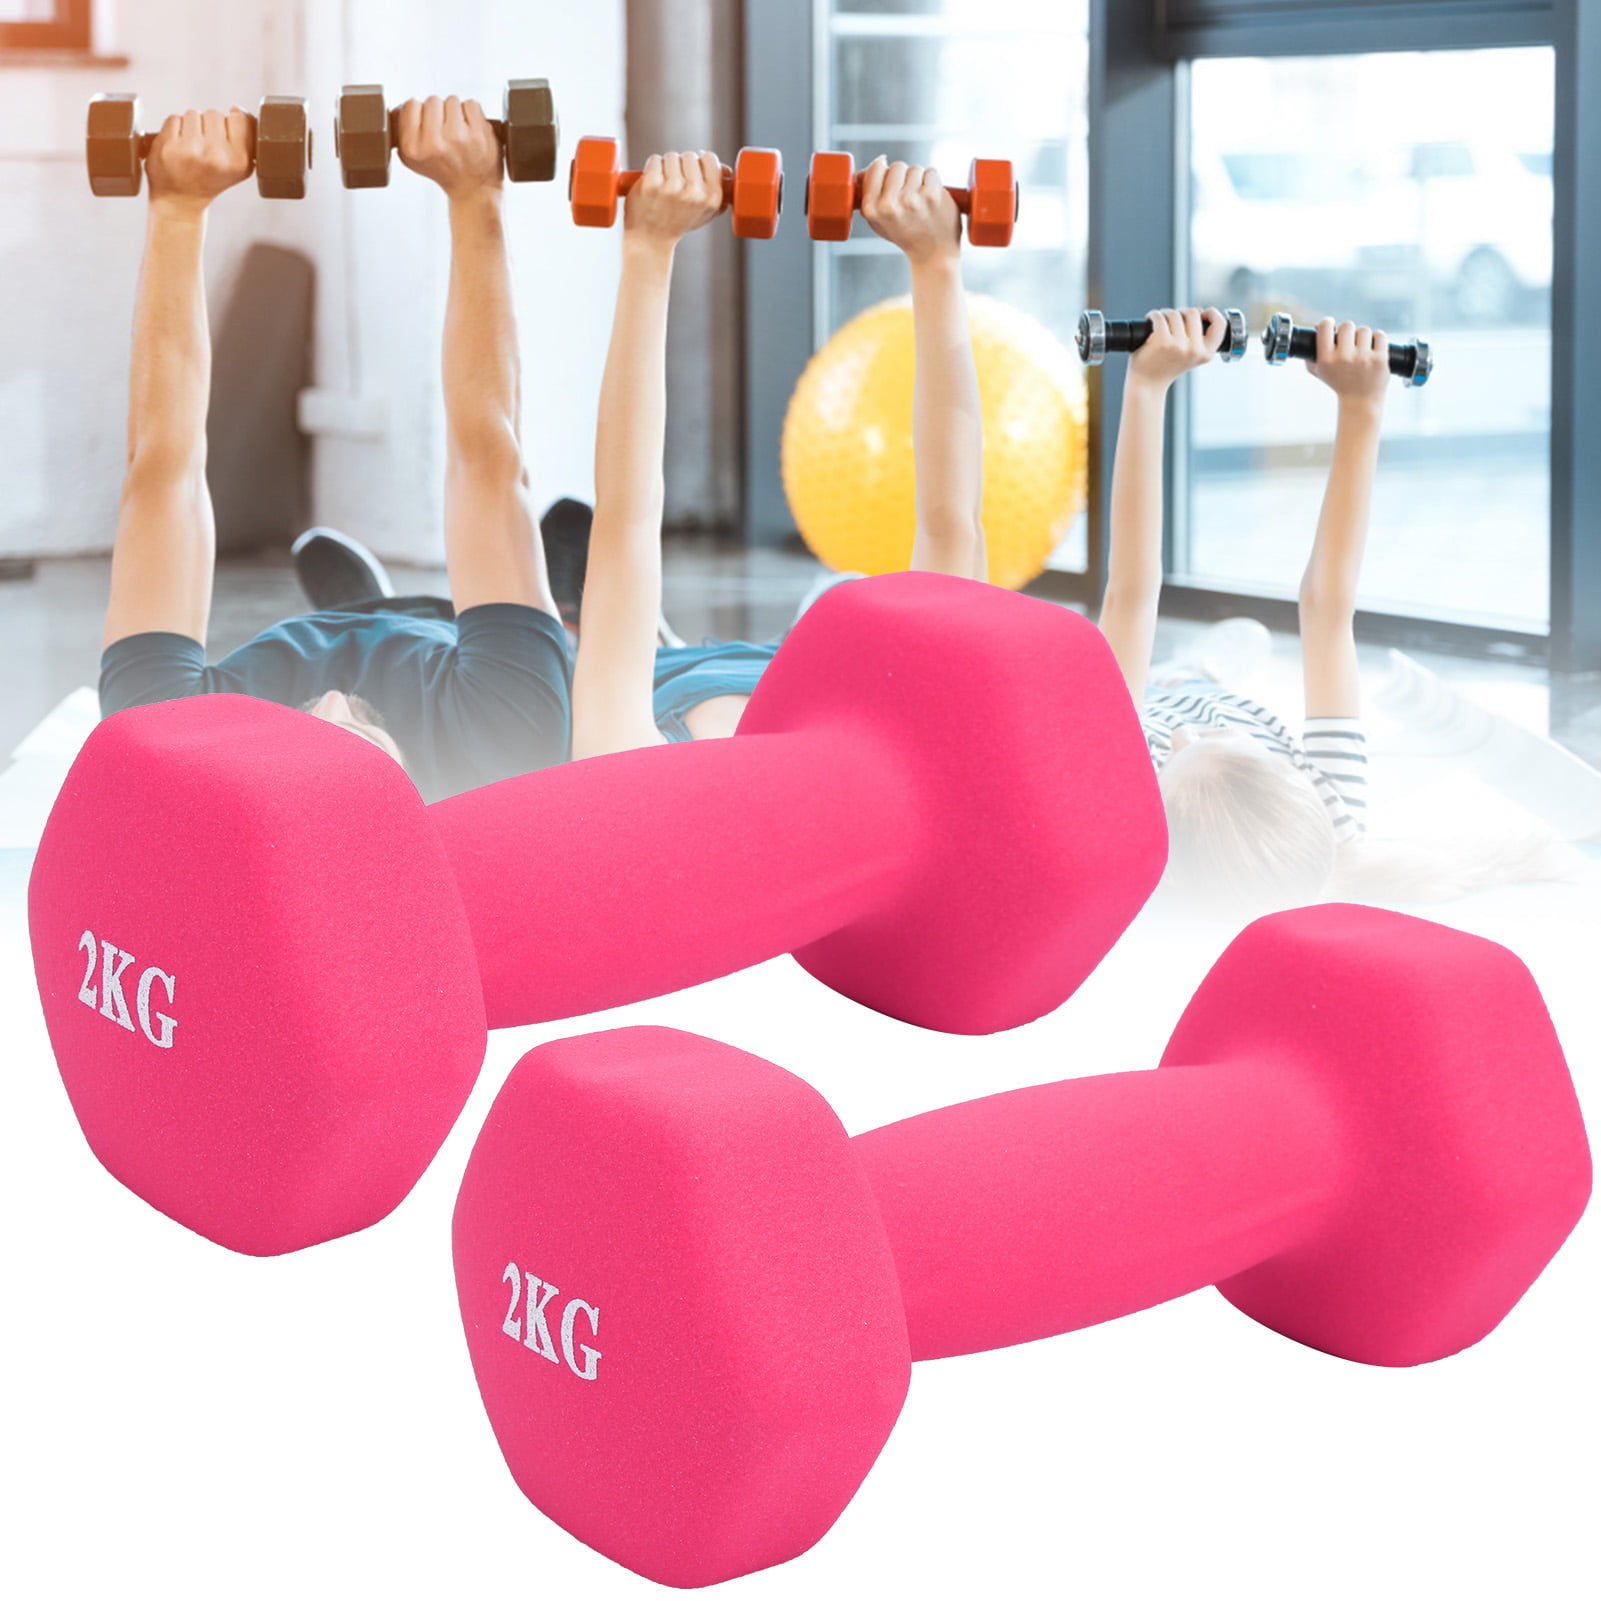 2X Fitness Neoprene Dumbbell Hand Weights Gym Exercise Iron Dumbells Ladies/Mens 